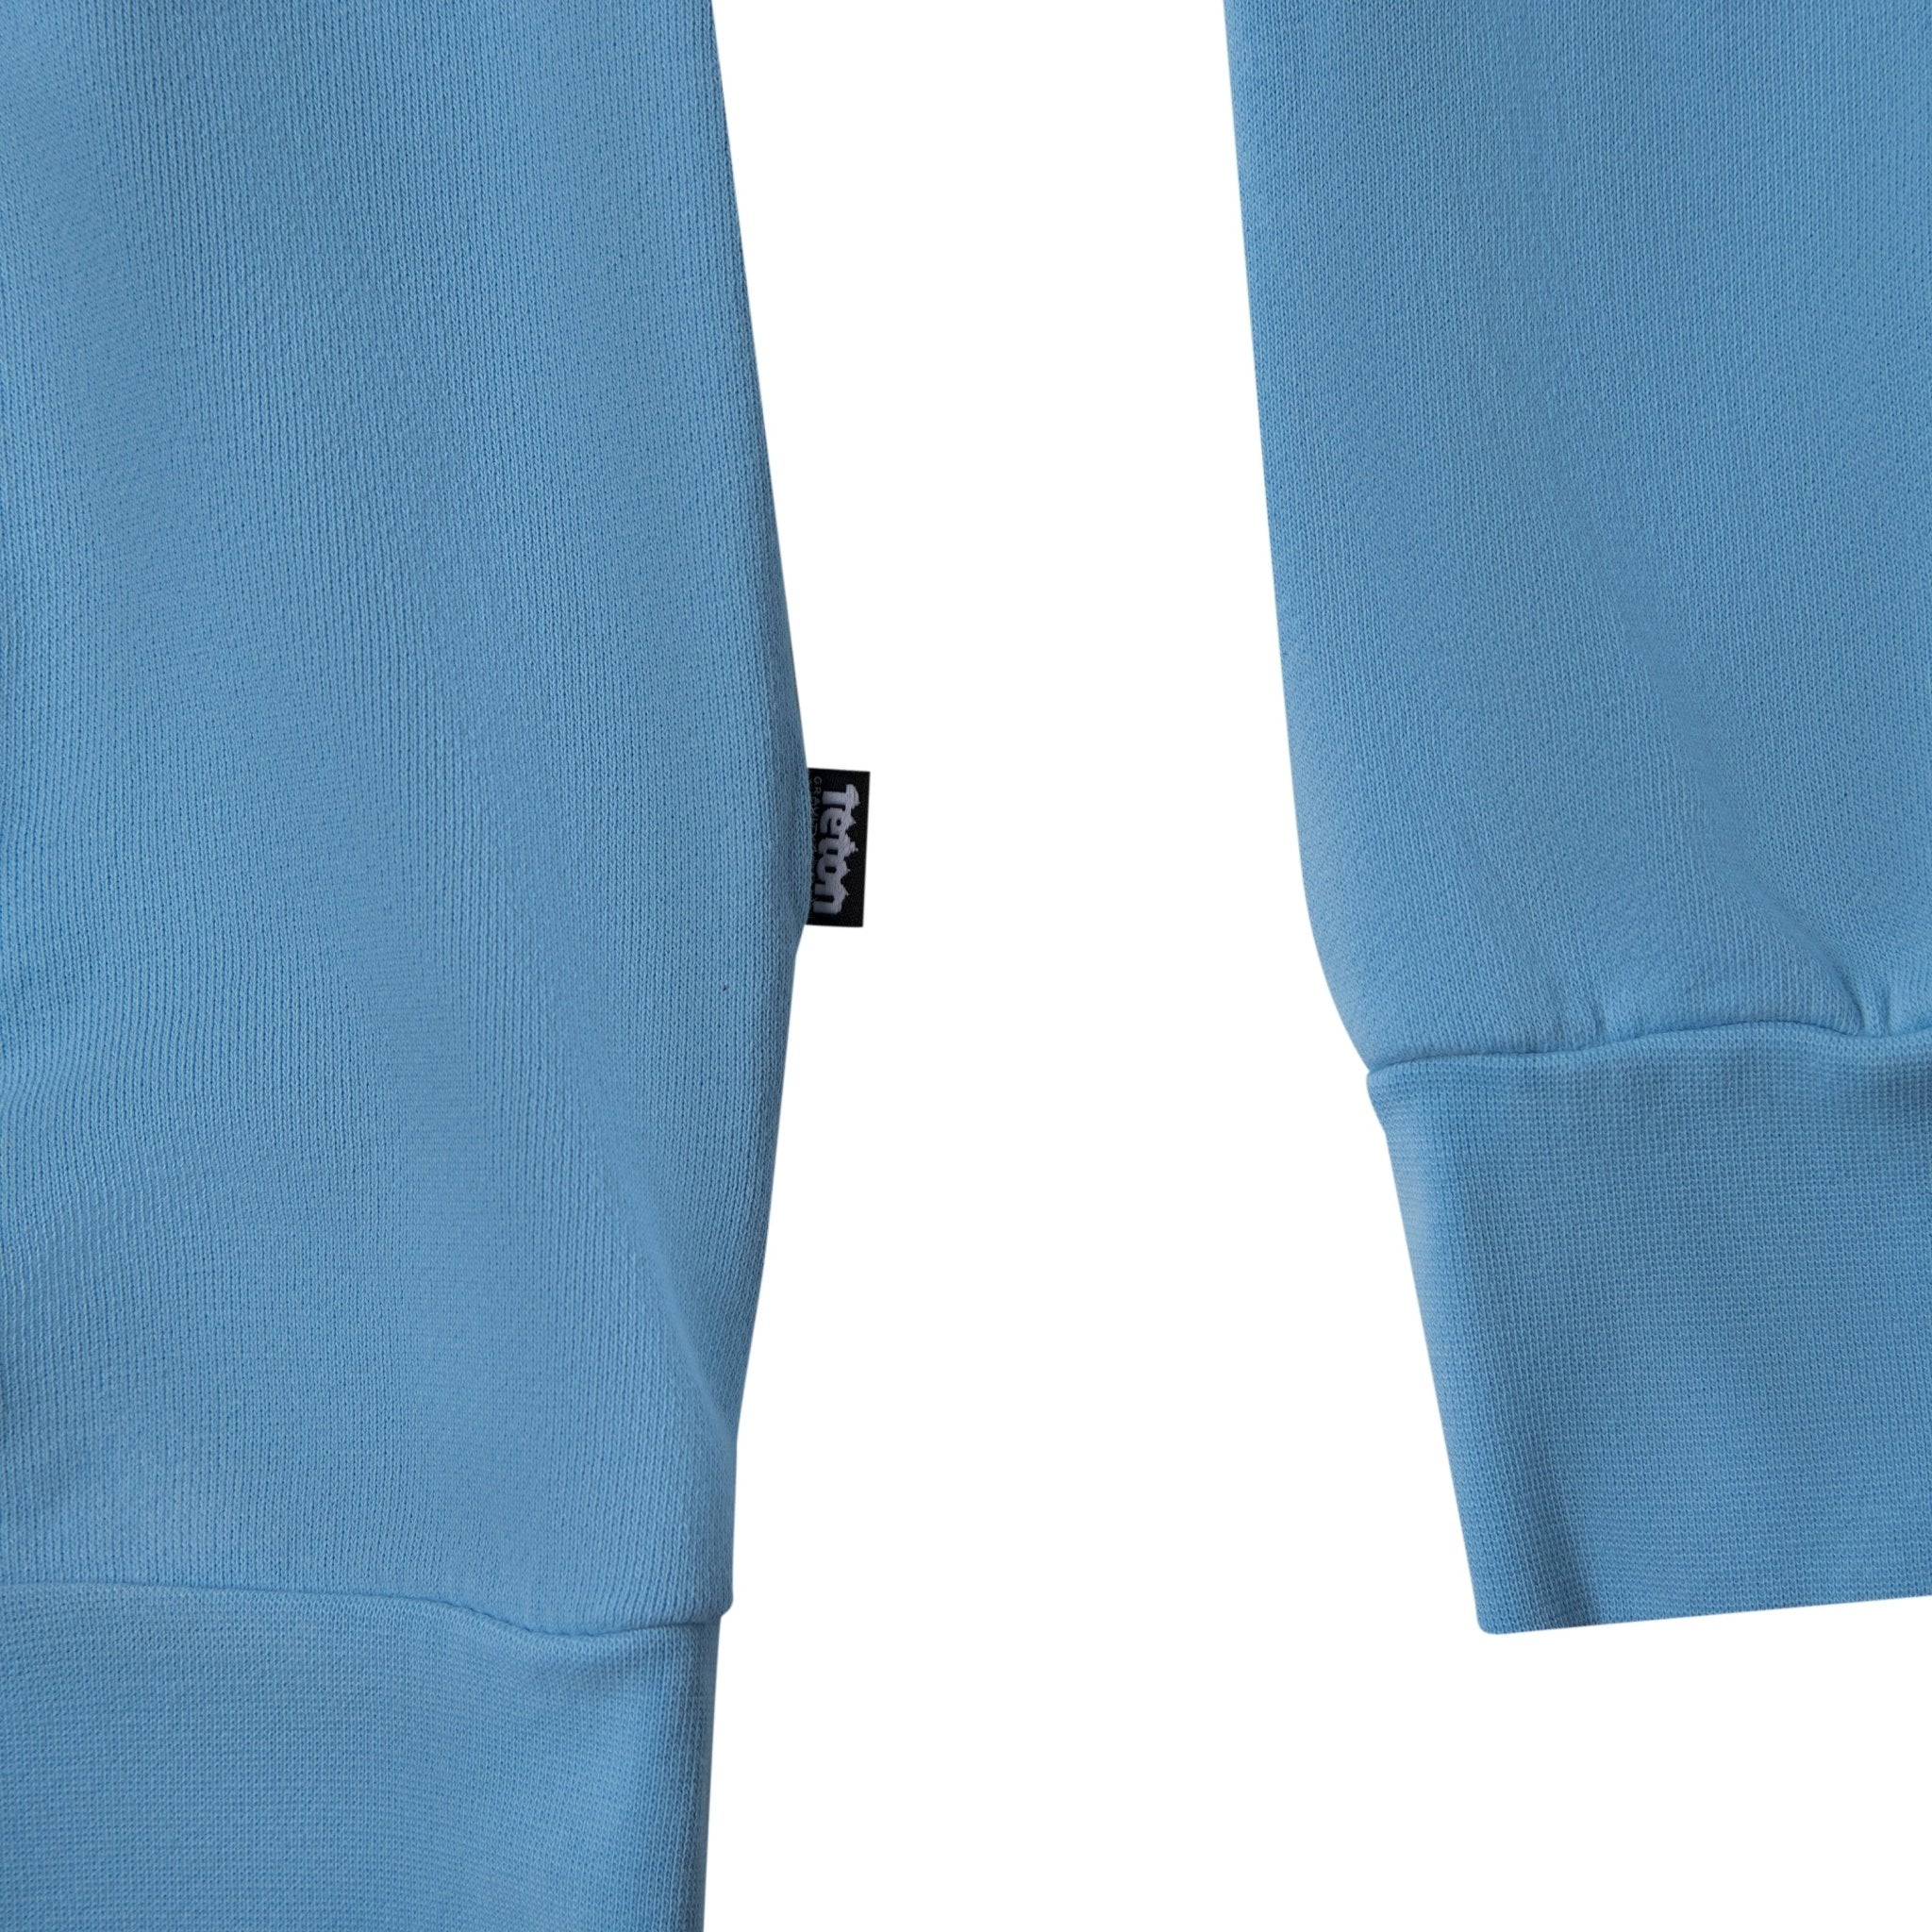 Picture of the small logo tag on the bottom left seam of the sweatshirt. #color_baby blue